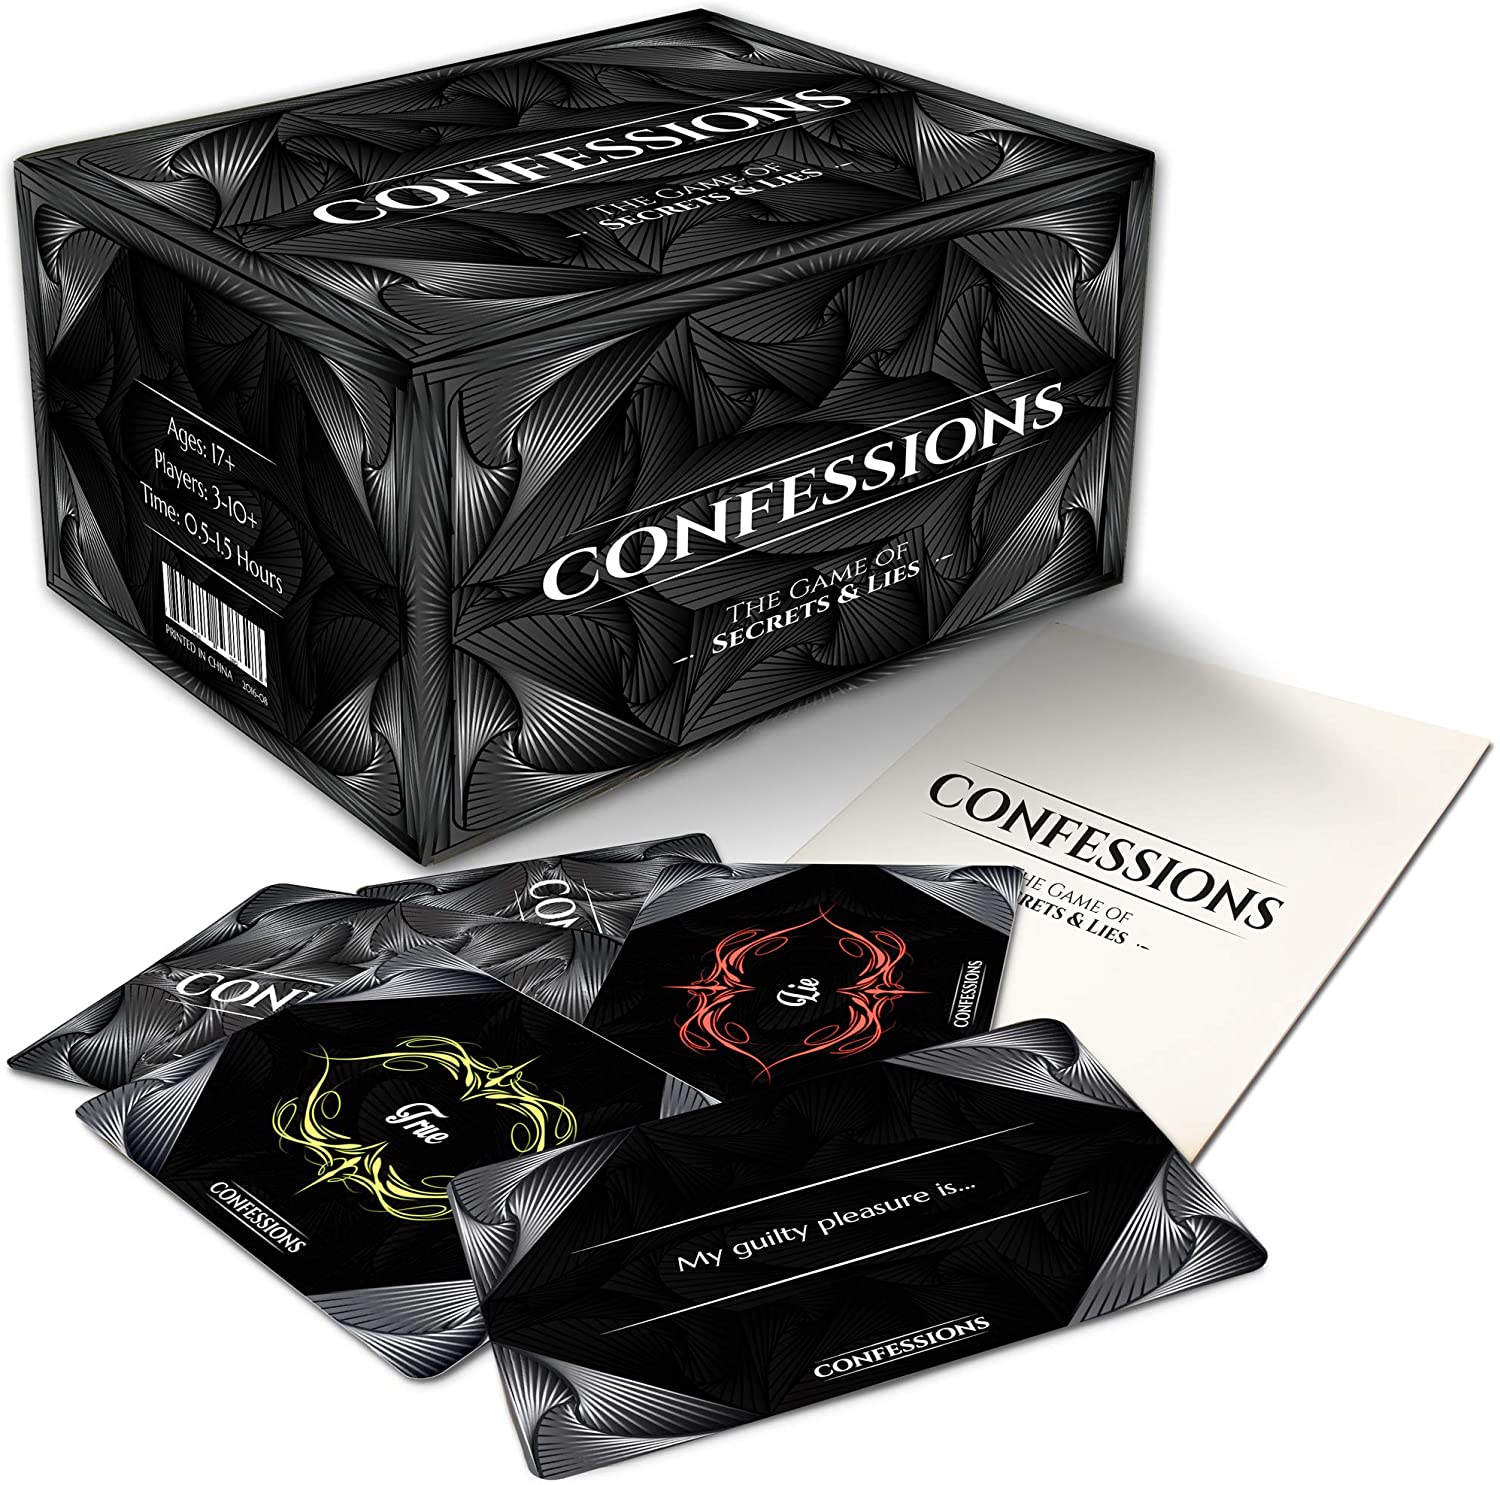 Confessions: The Game of Secrets & Lies